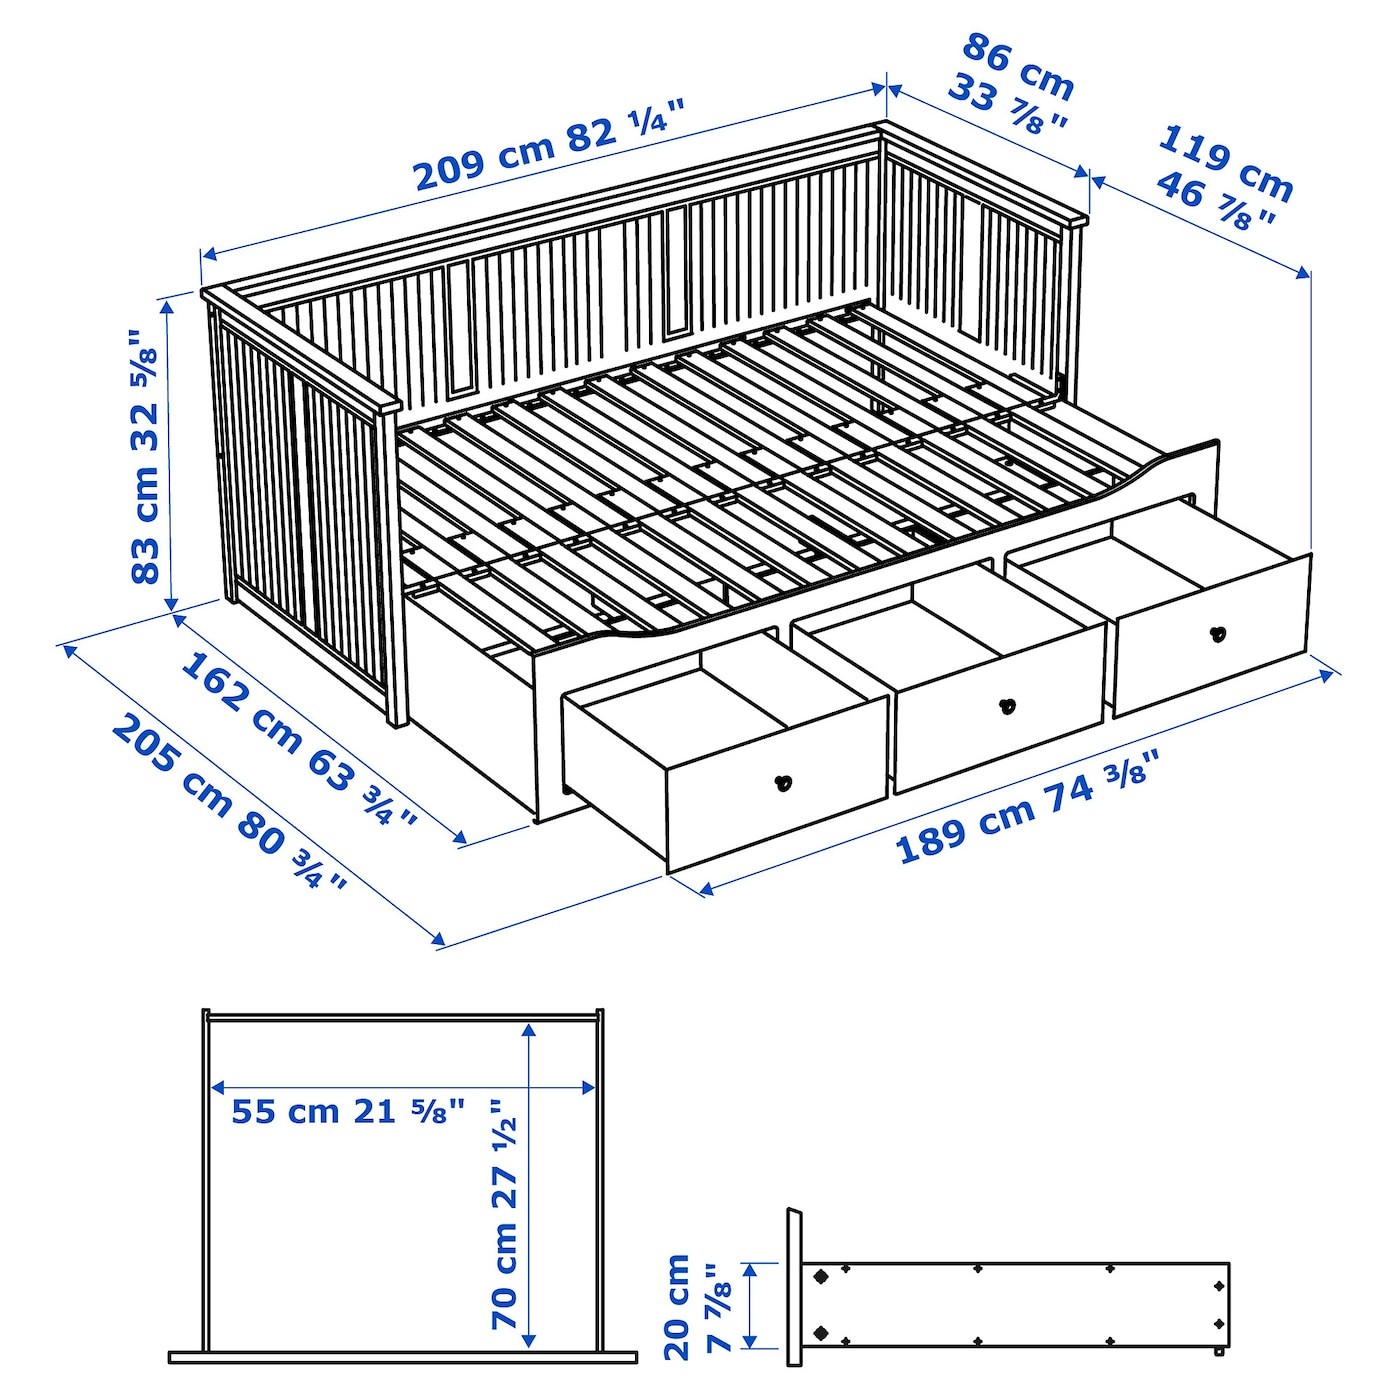 HEMNES Day-bed frame with 3 drawers